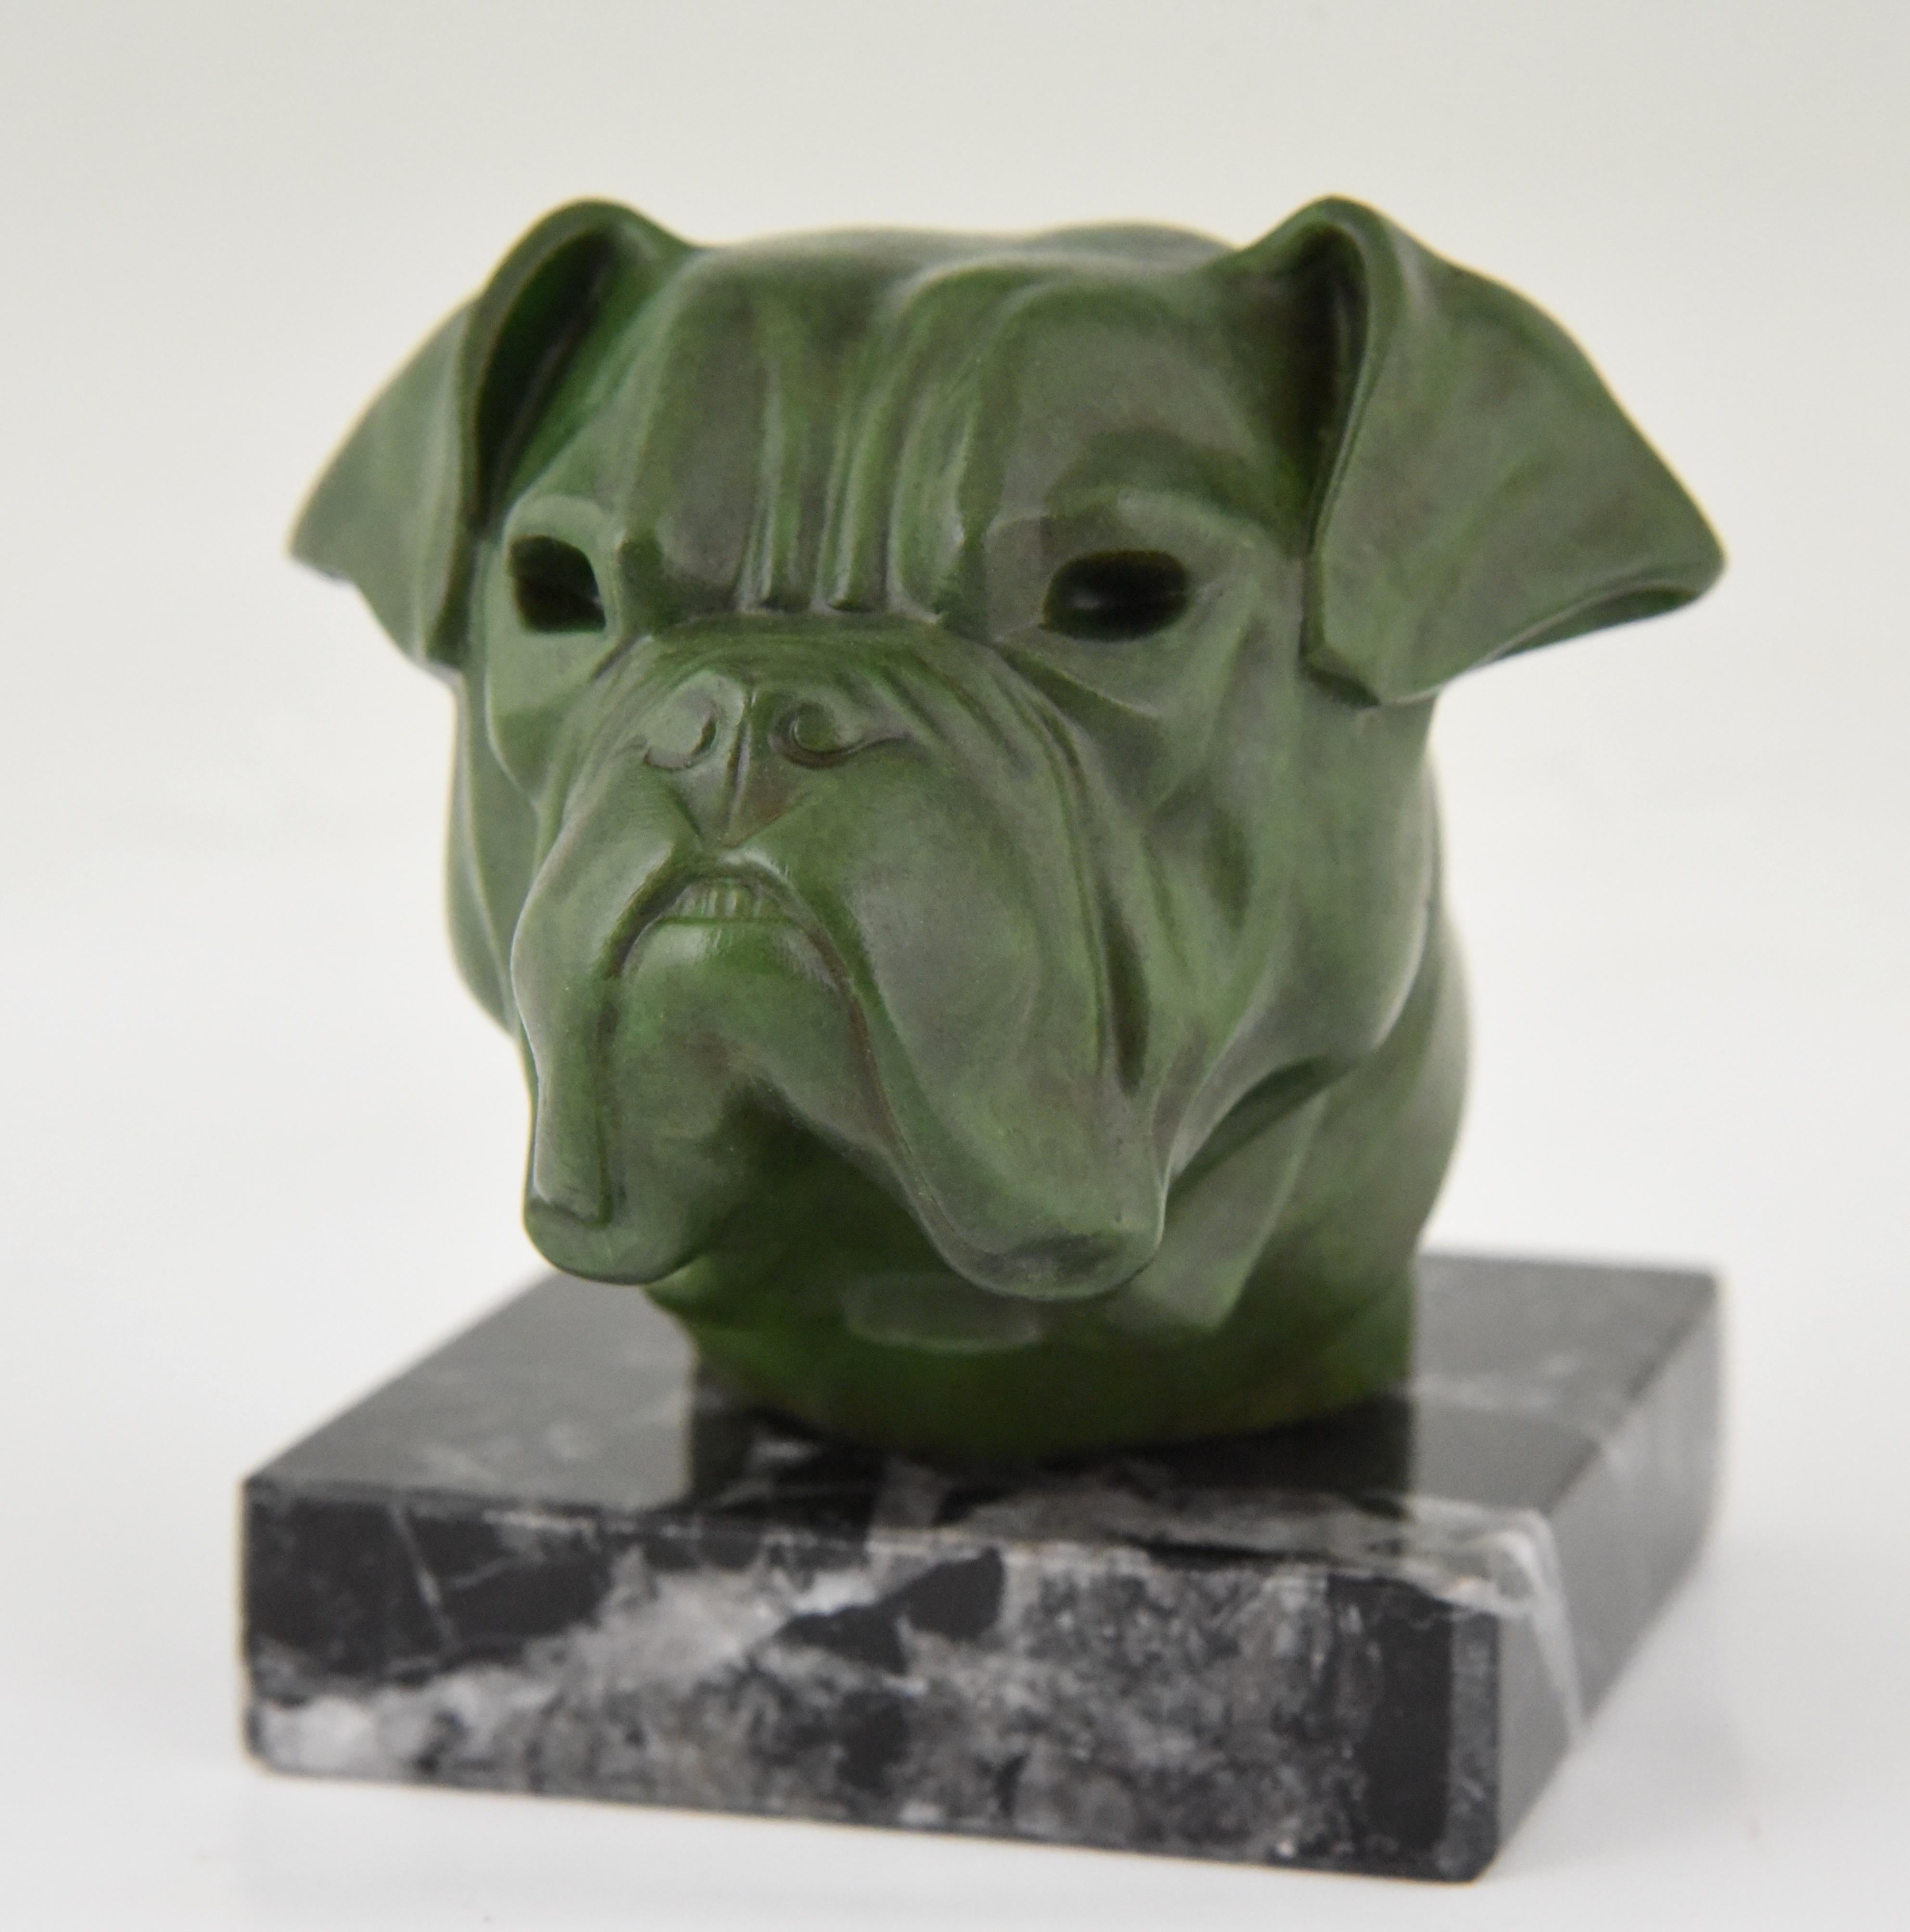 Art Deco sculpture of a bulldog by Max Le Verrier, France, 1930.
Patinated art metal on a marble base. 

This model is illustrated as car mascot in the book: “Mascottes passion” by Michel Legrand, Antic show éditions. General information about